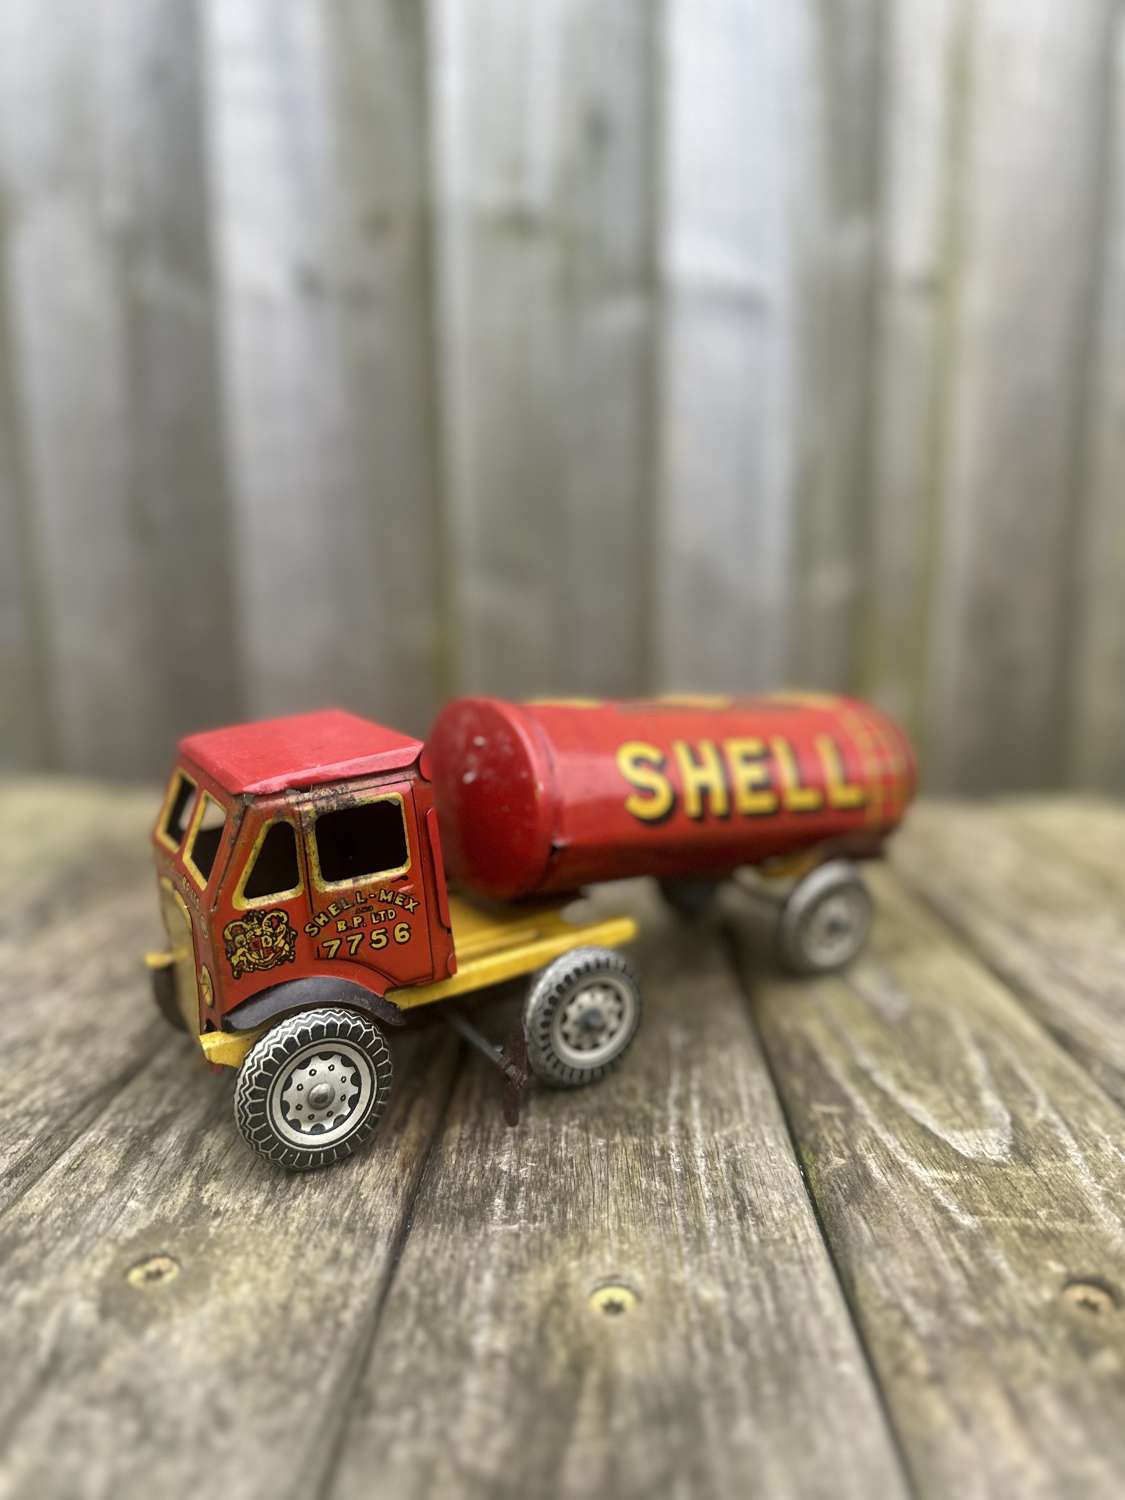 Mettoy advertising bp shell tanker toy